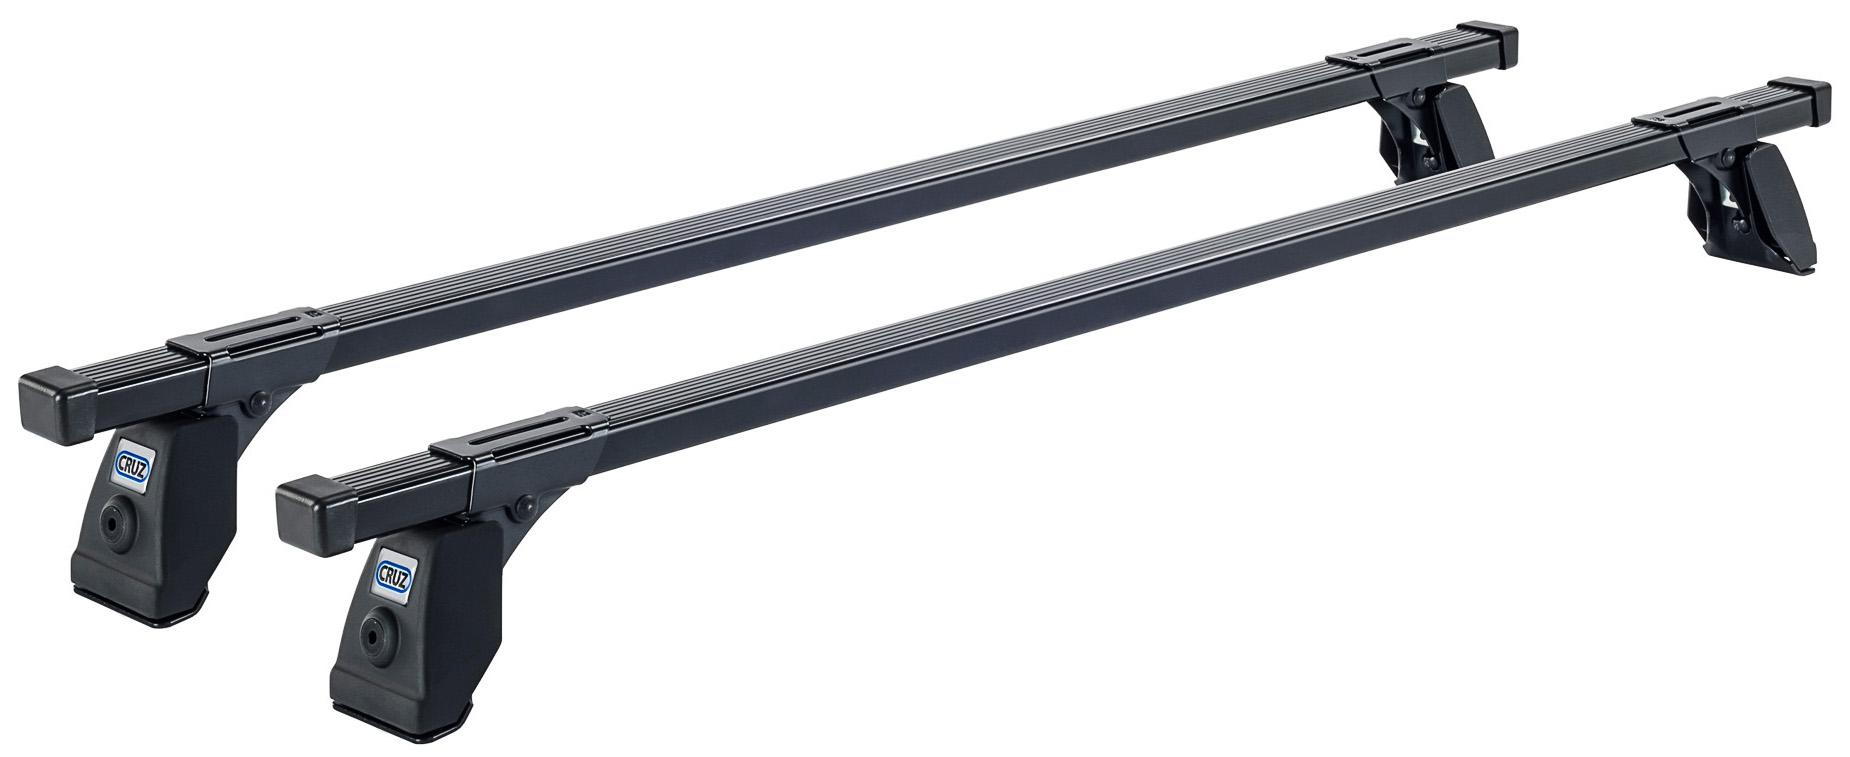 Cruz Commercial Roof Bars 30 X 20 922-415 - Pack Of 2